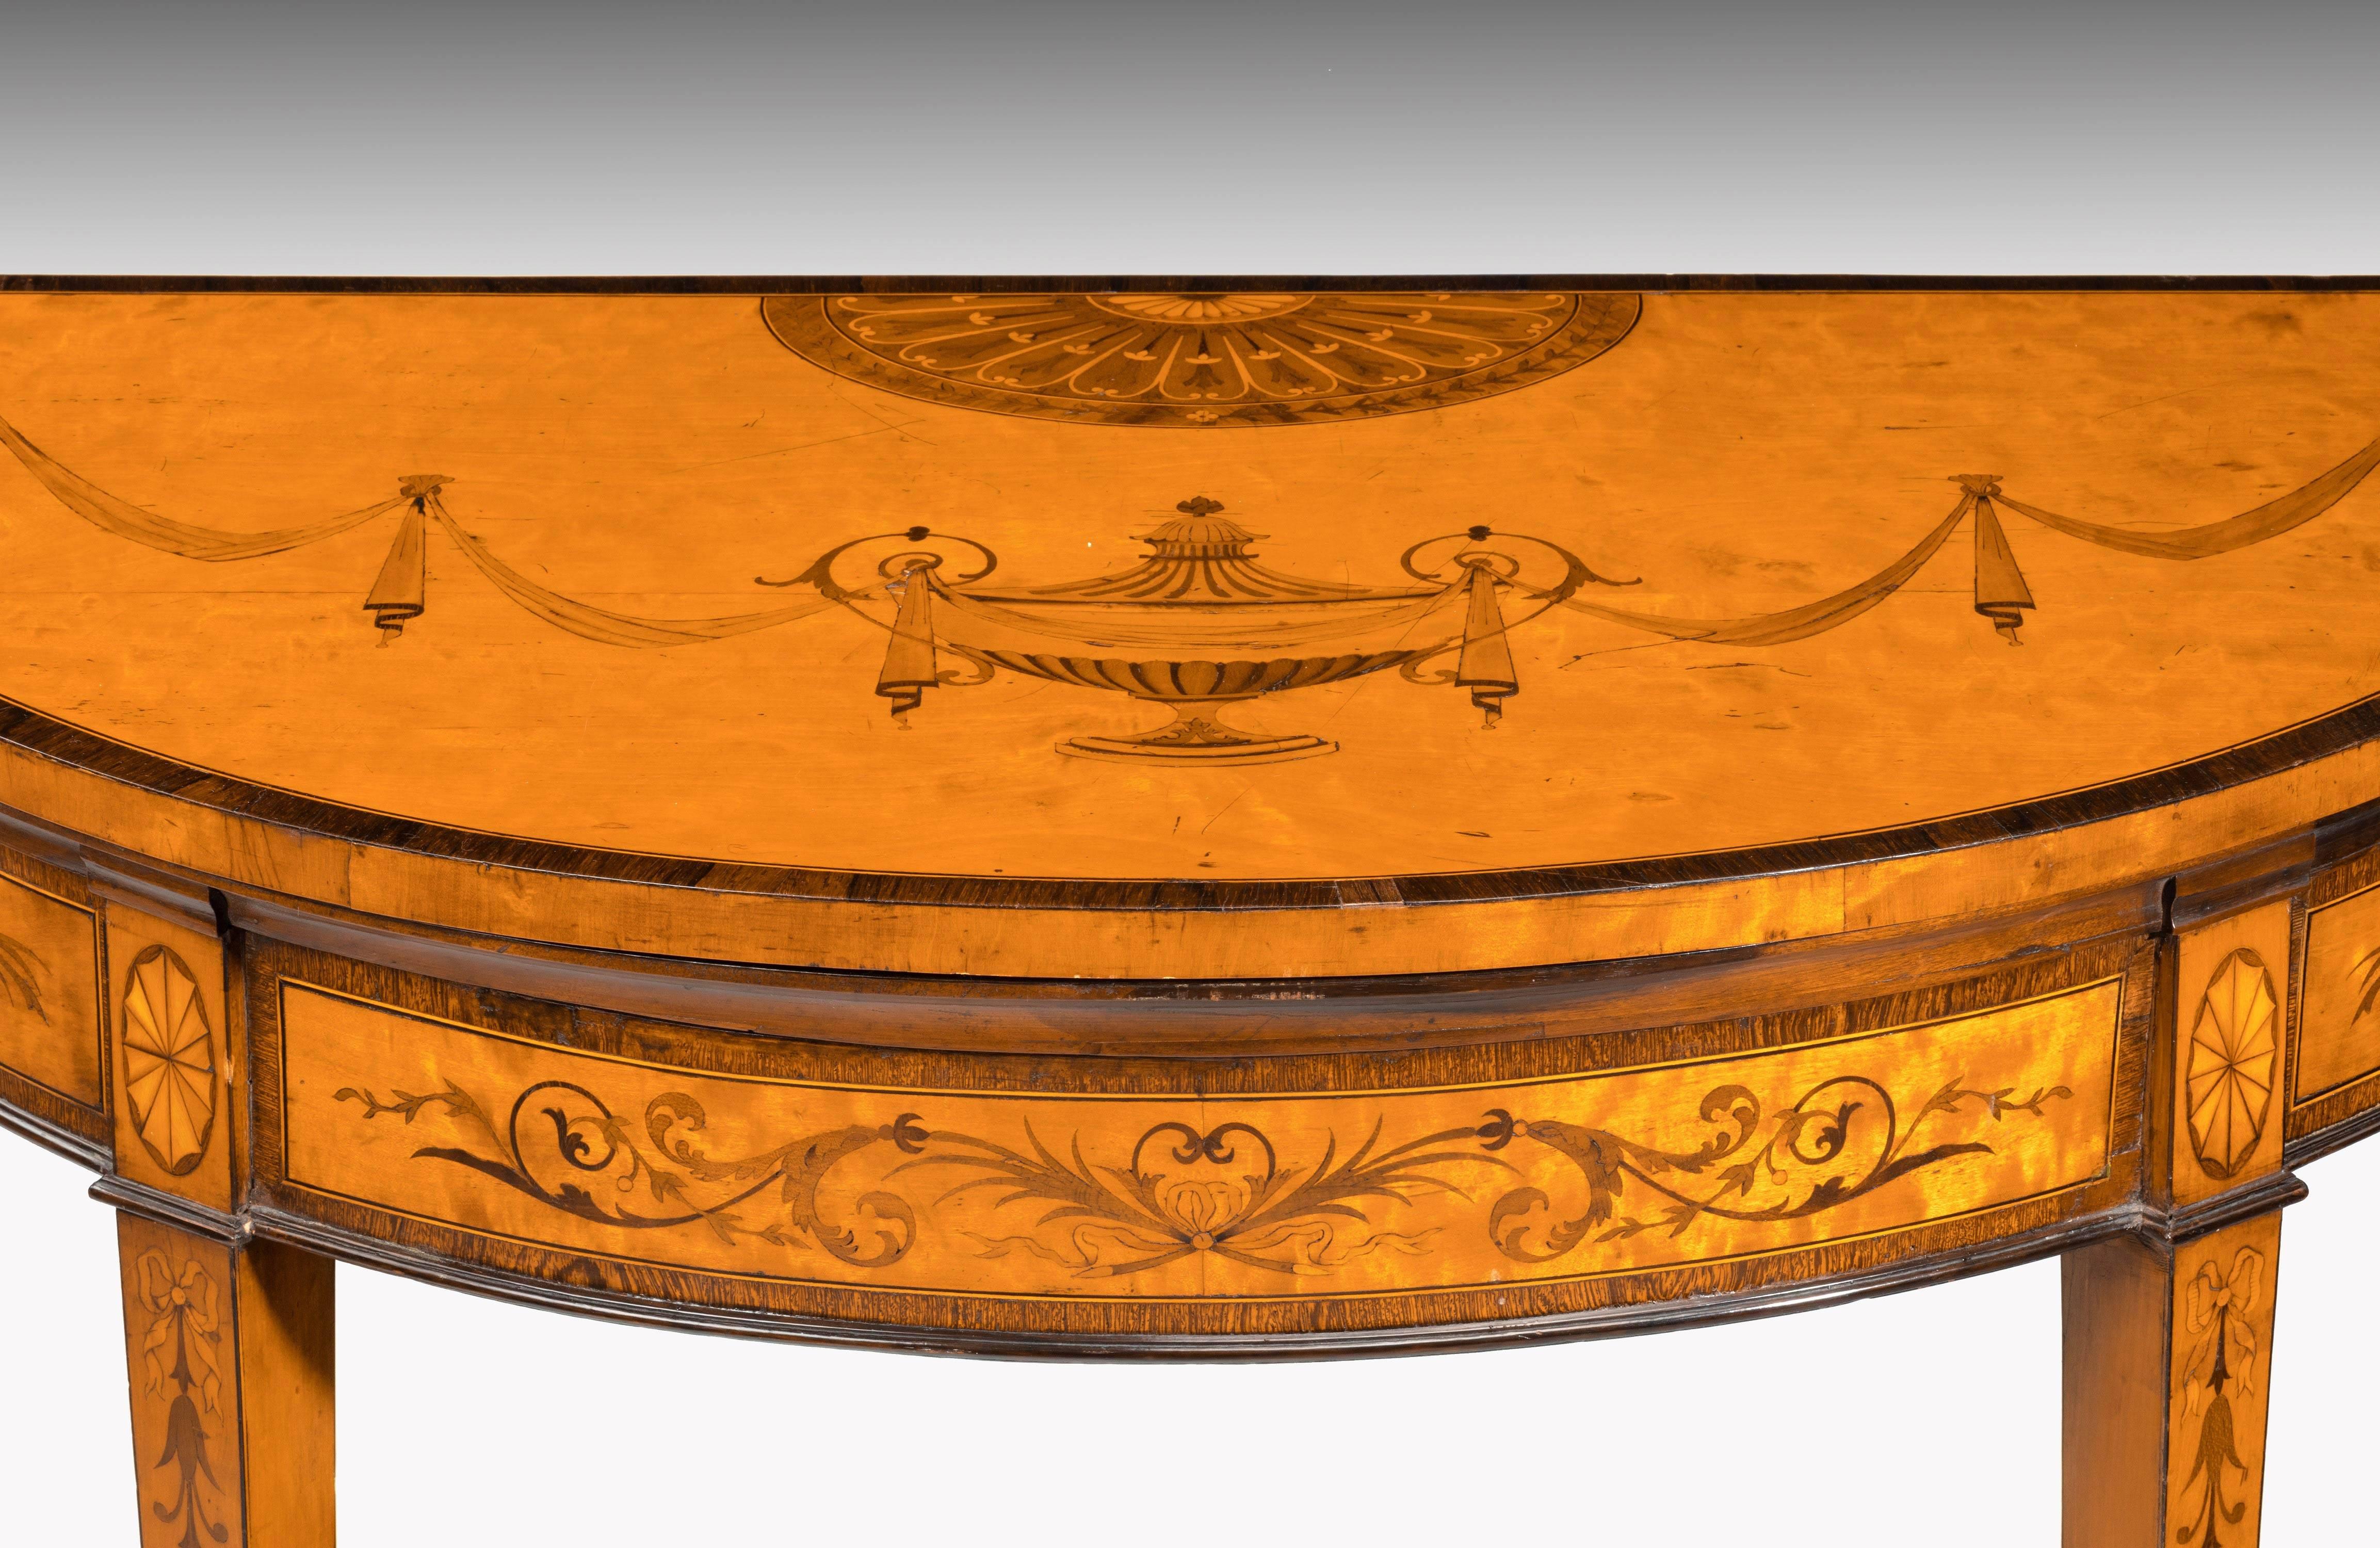 A particularly fine, George III period, satinwood demilune card table with very finely executed marquetry and parquetry inlays of exotic timbers. Tapering supports ending in box shoes.